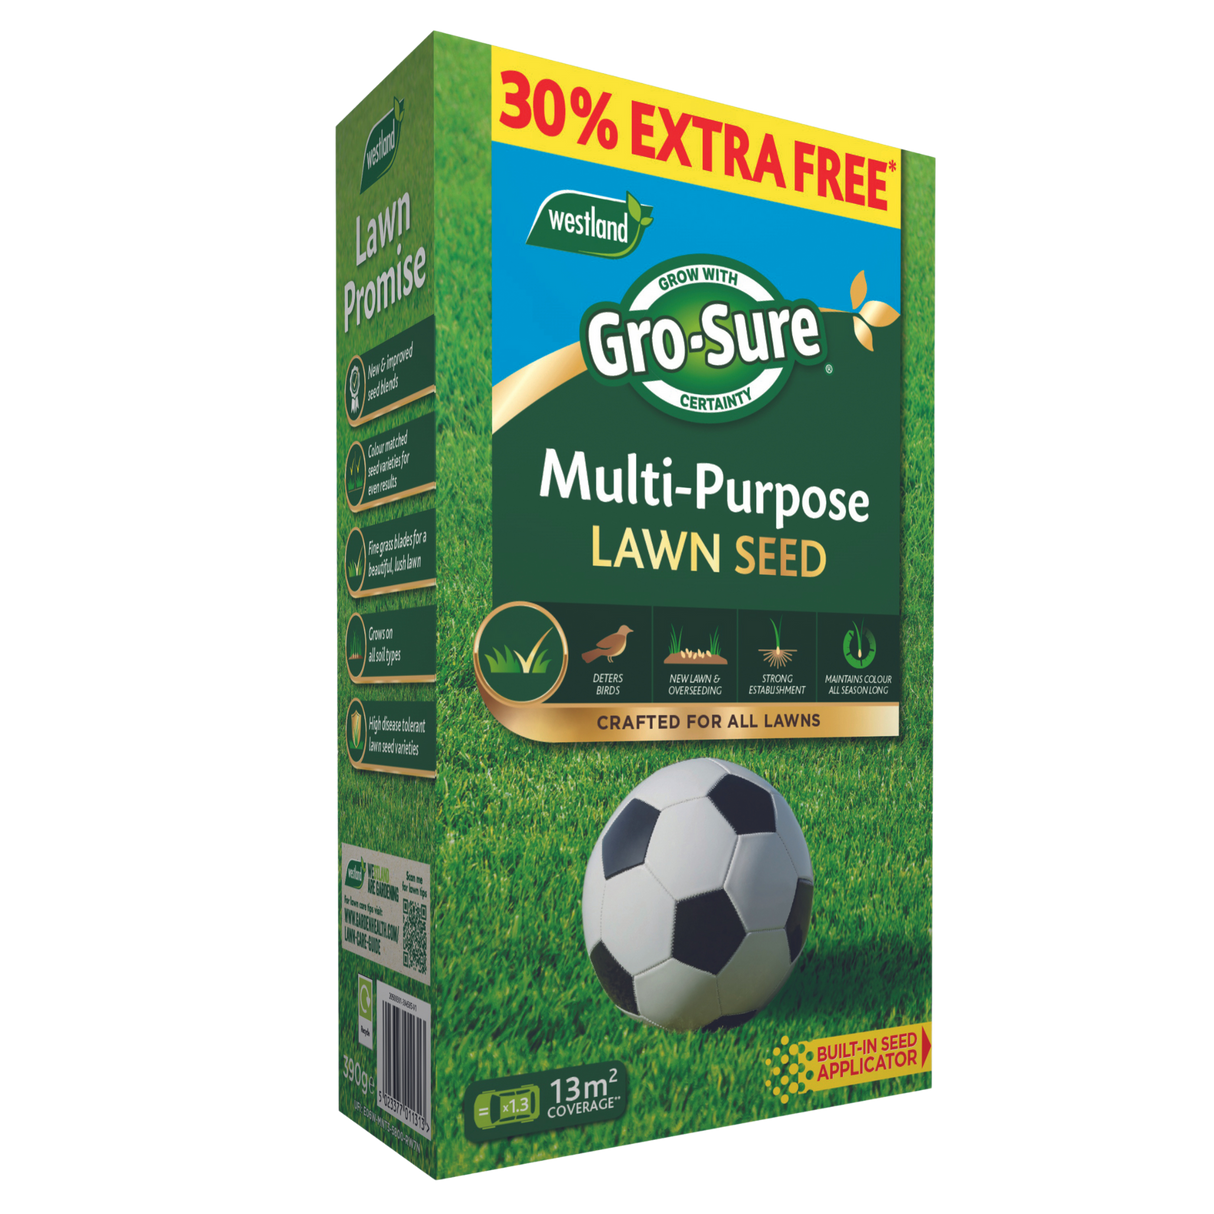 Add-on Multi-Purpose Lawn Grass Seed 13m2 + 30% EXTRA FREE